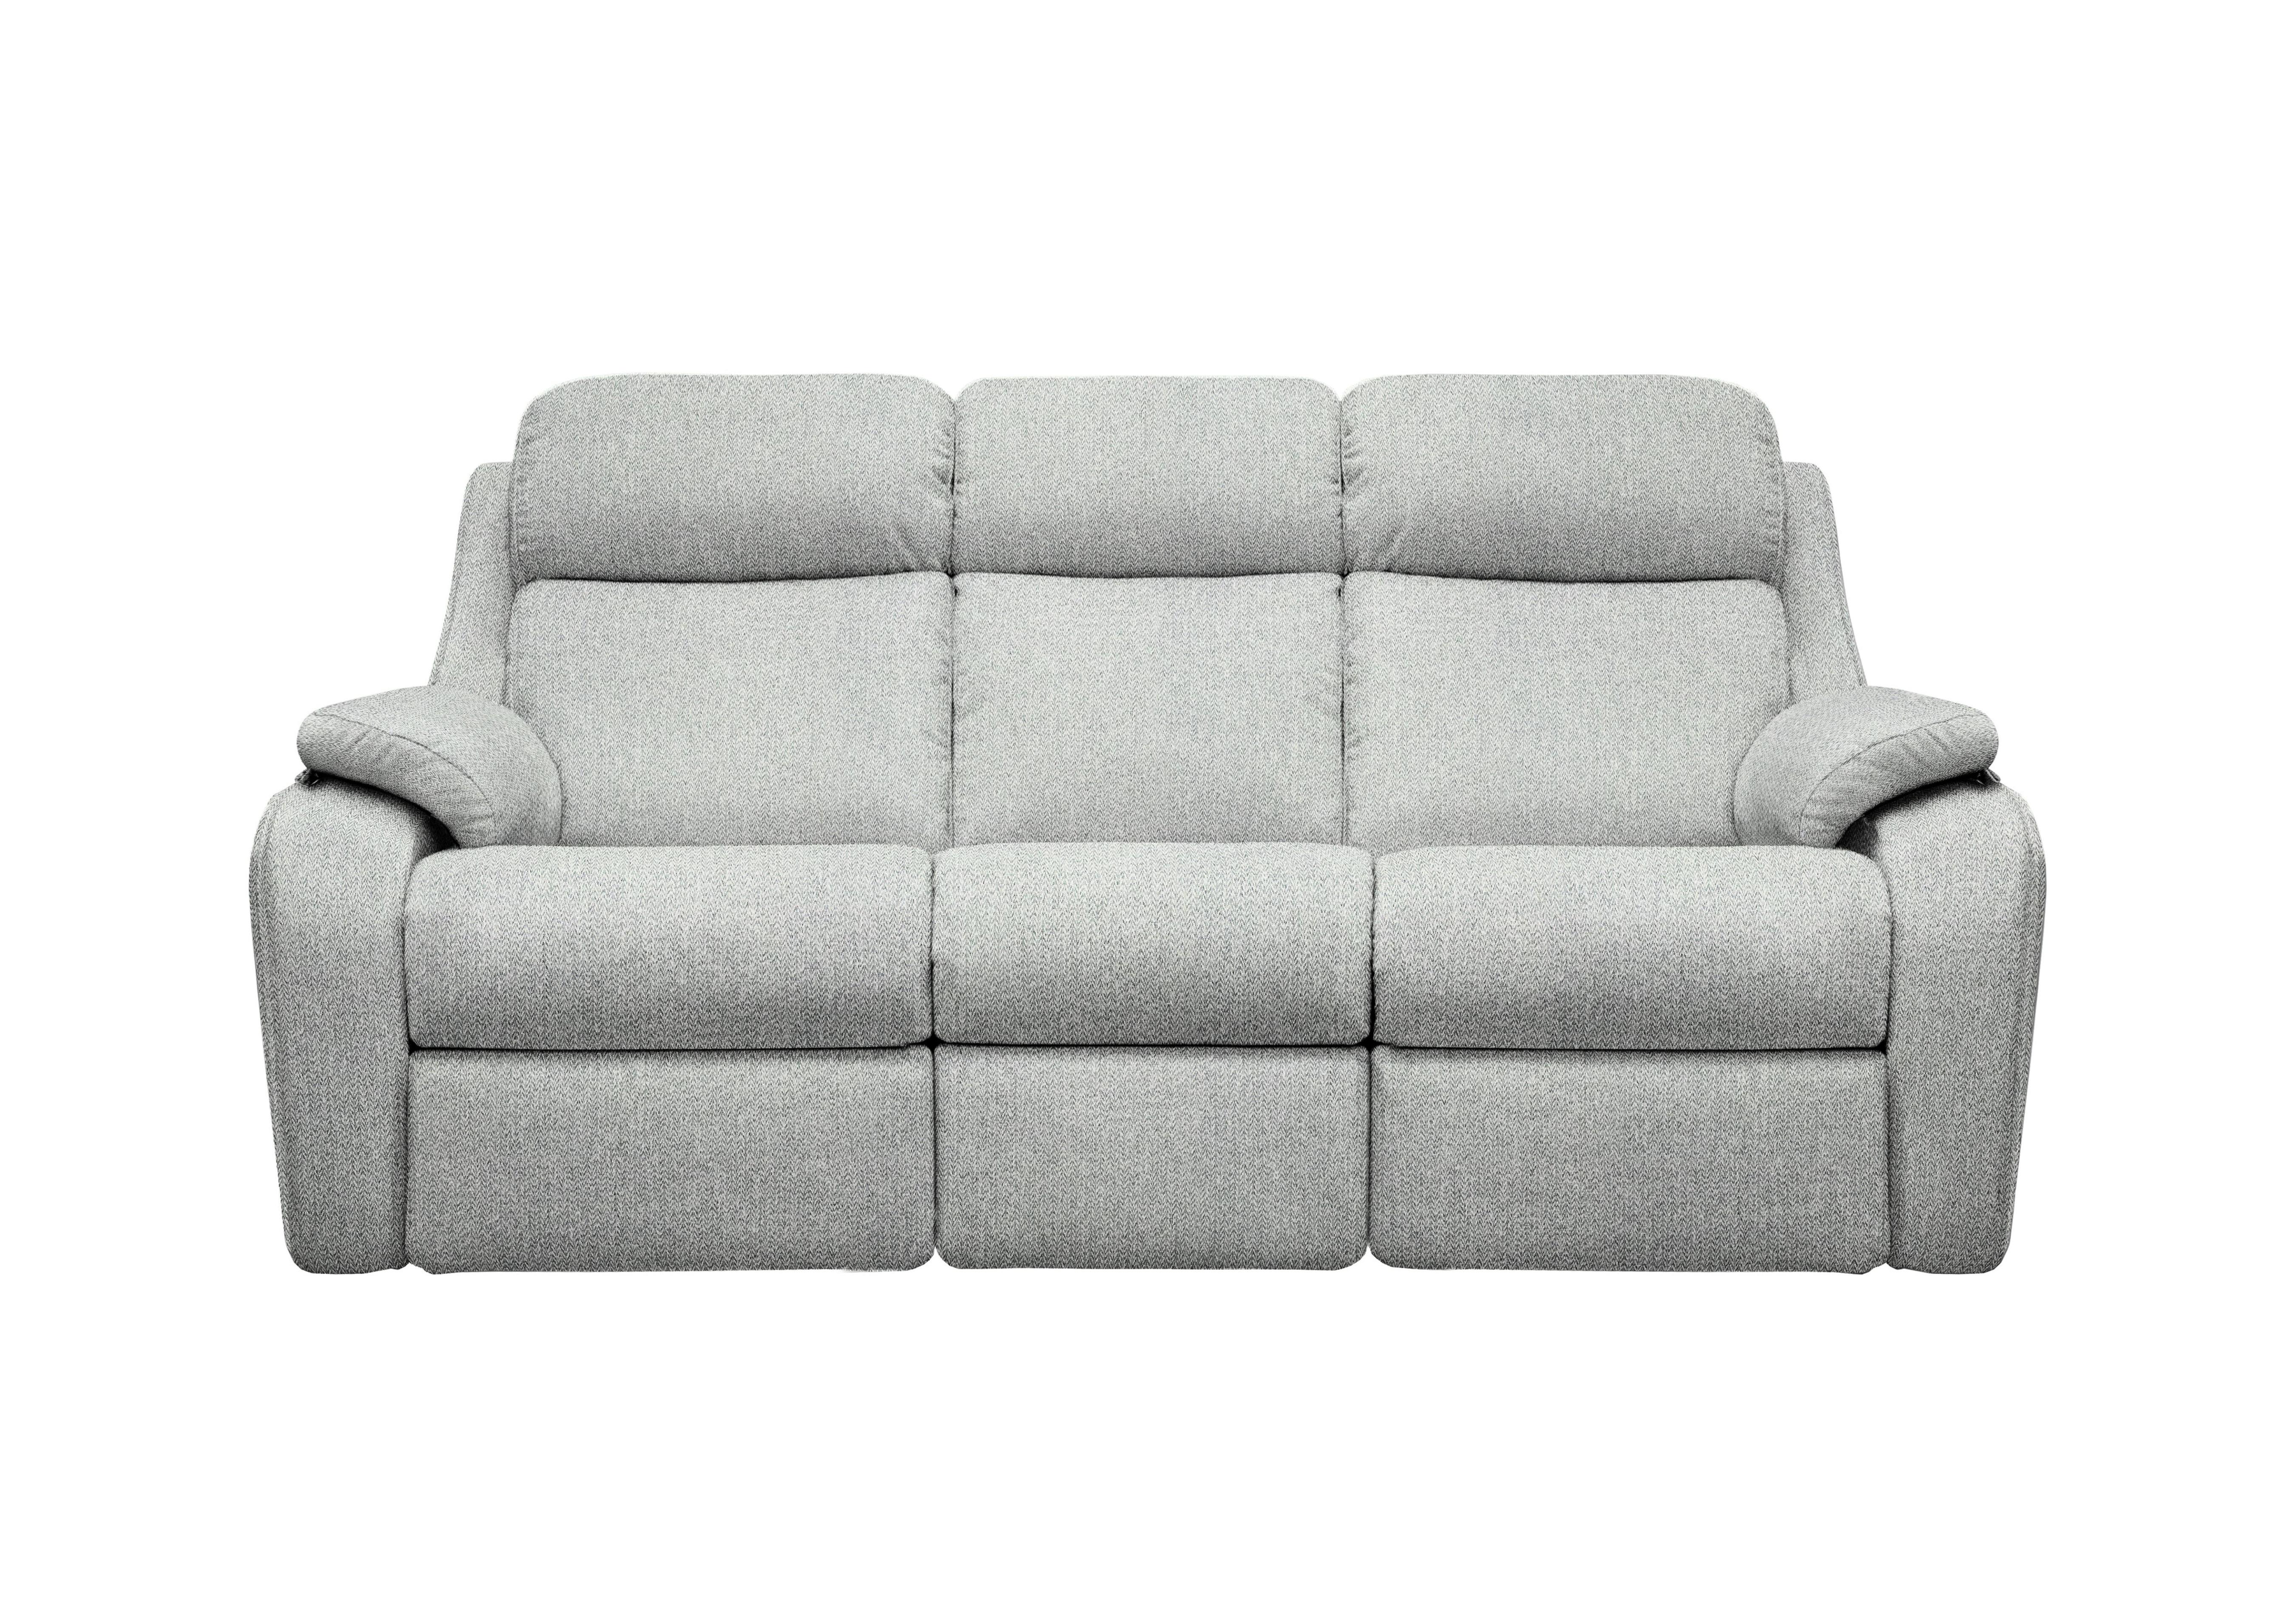 Kingsbury 3 Seater Fabric Power Recliner Sofa with Power Headrests in A011 Swift Cygnet on Furniture Village